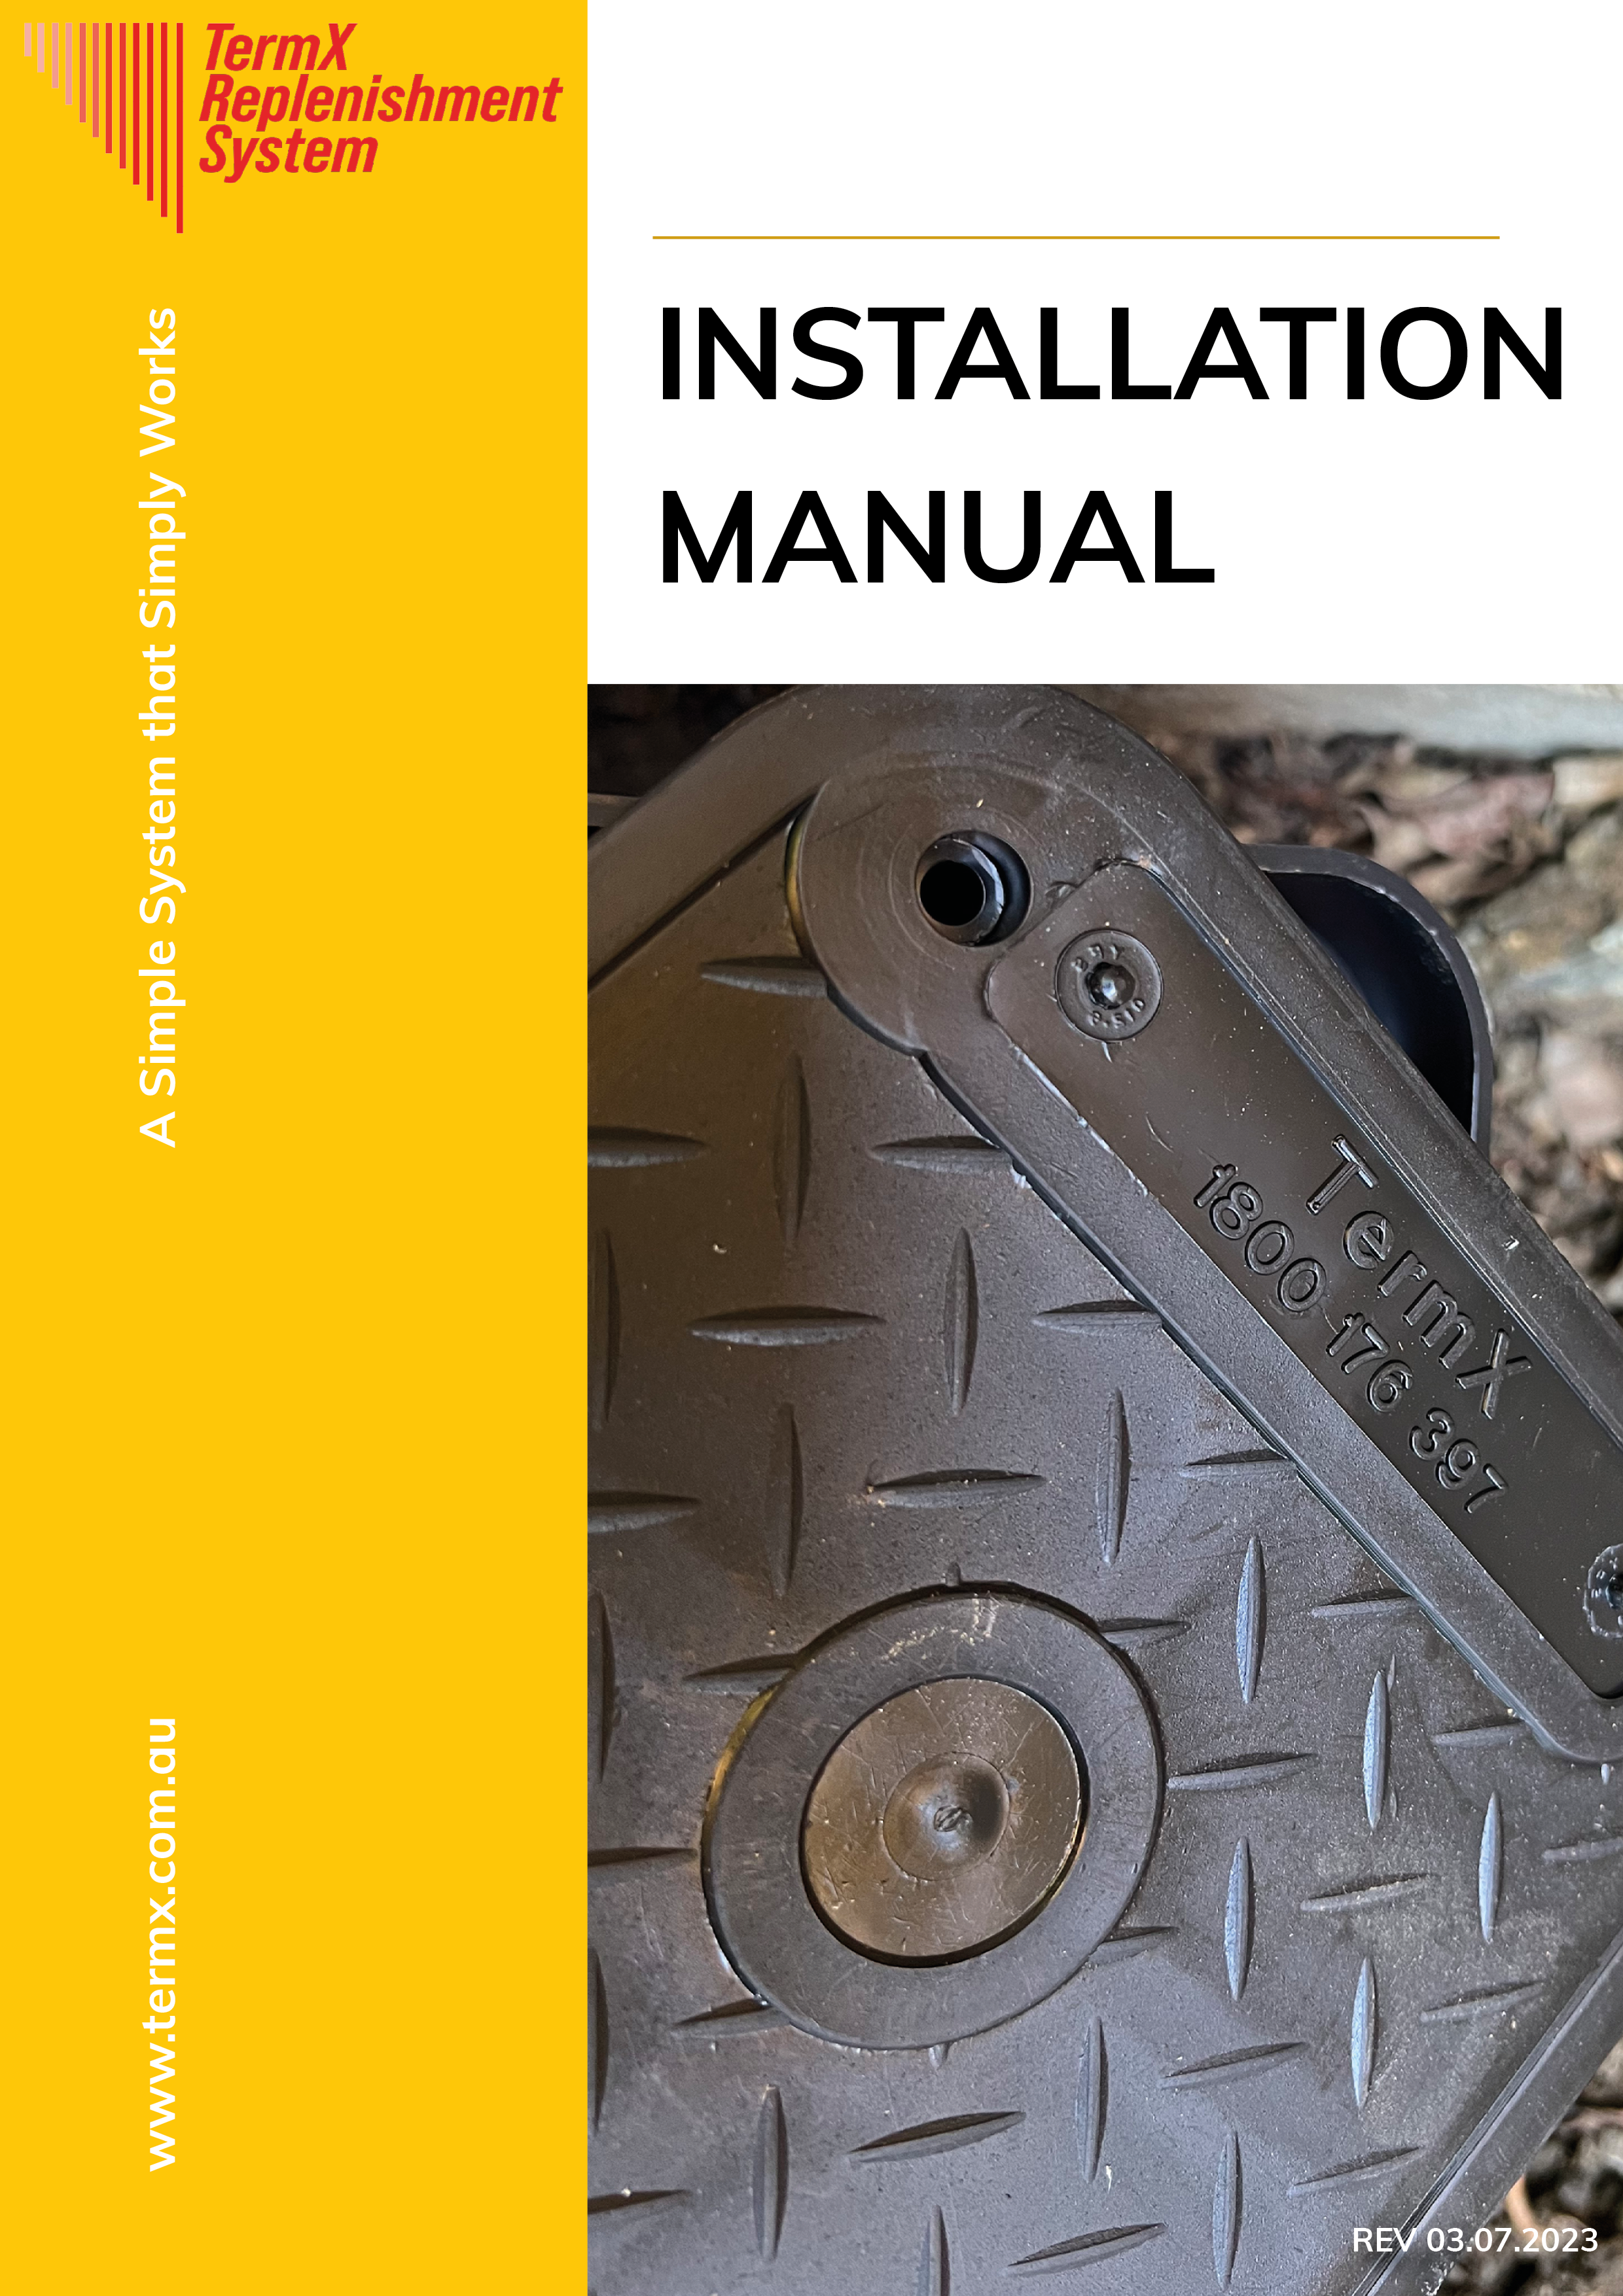 TermX Installation Manual front cover